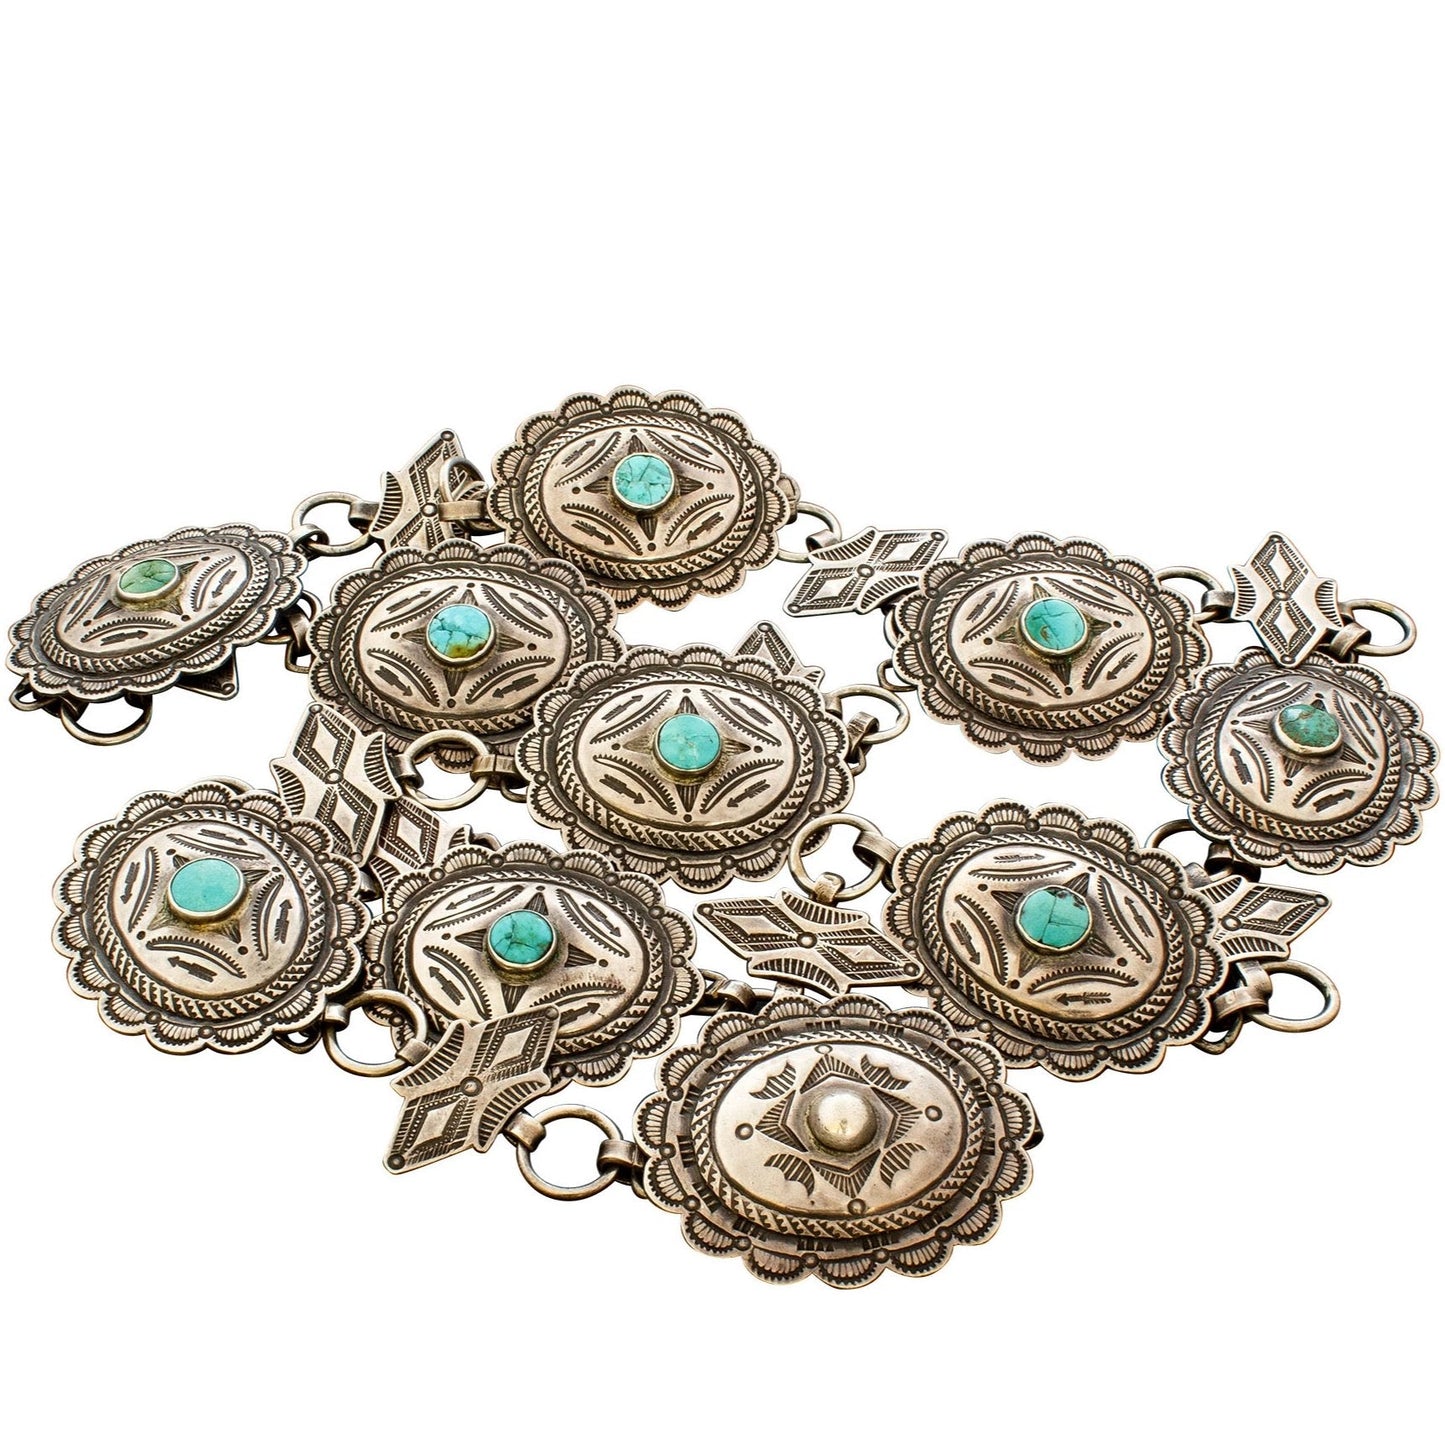 Rare Old Hopi Morris Robinson Concho Belt of Silver With Turquoise - Turquoise & Tufa